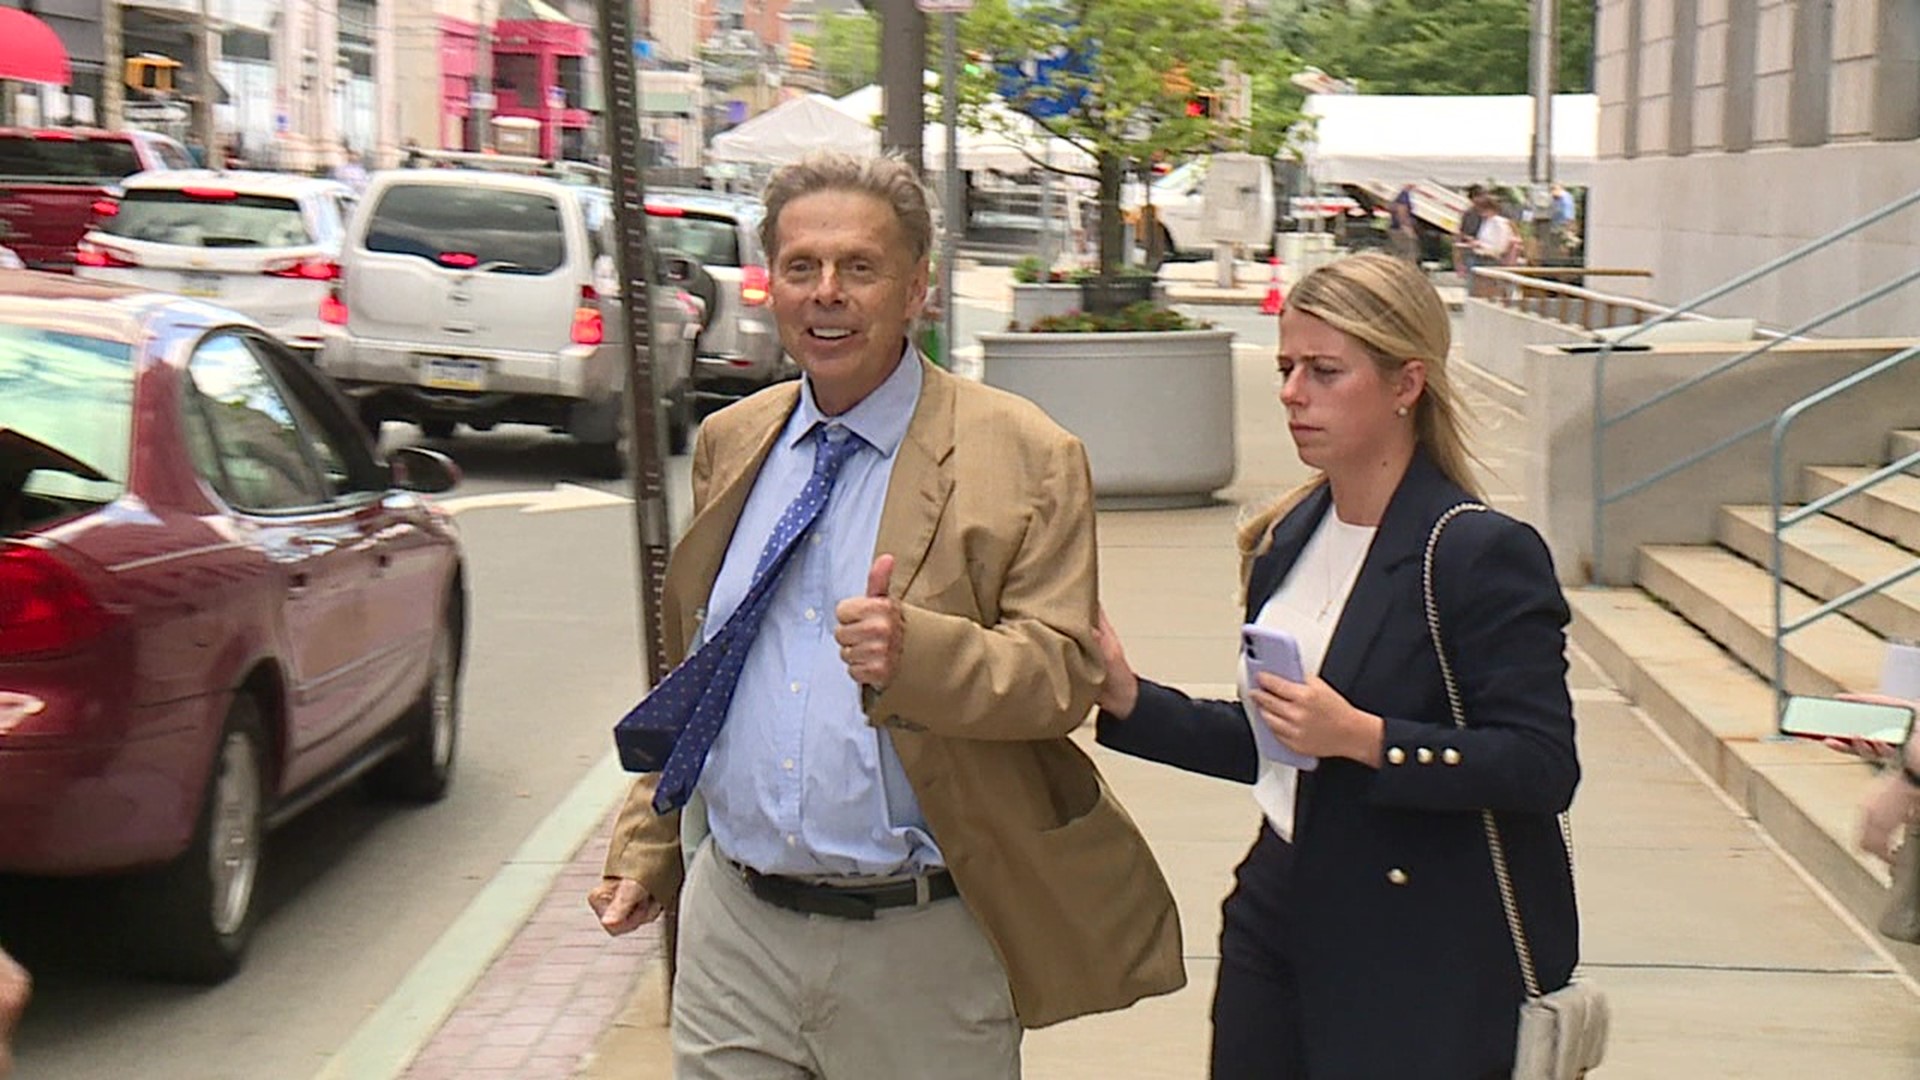 Dr. Kurt Moran pleaded guilty in federal court last December to drug and medical fraud charges.